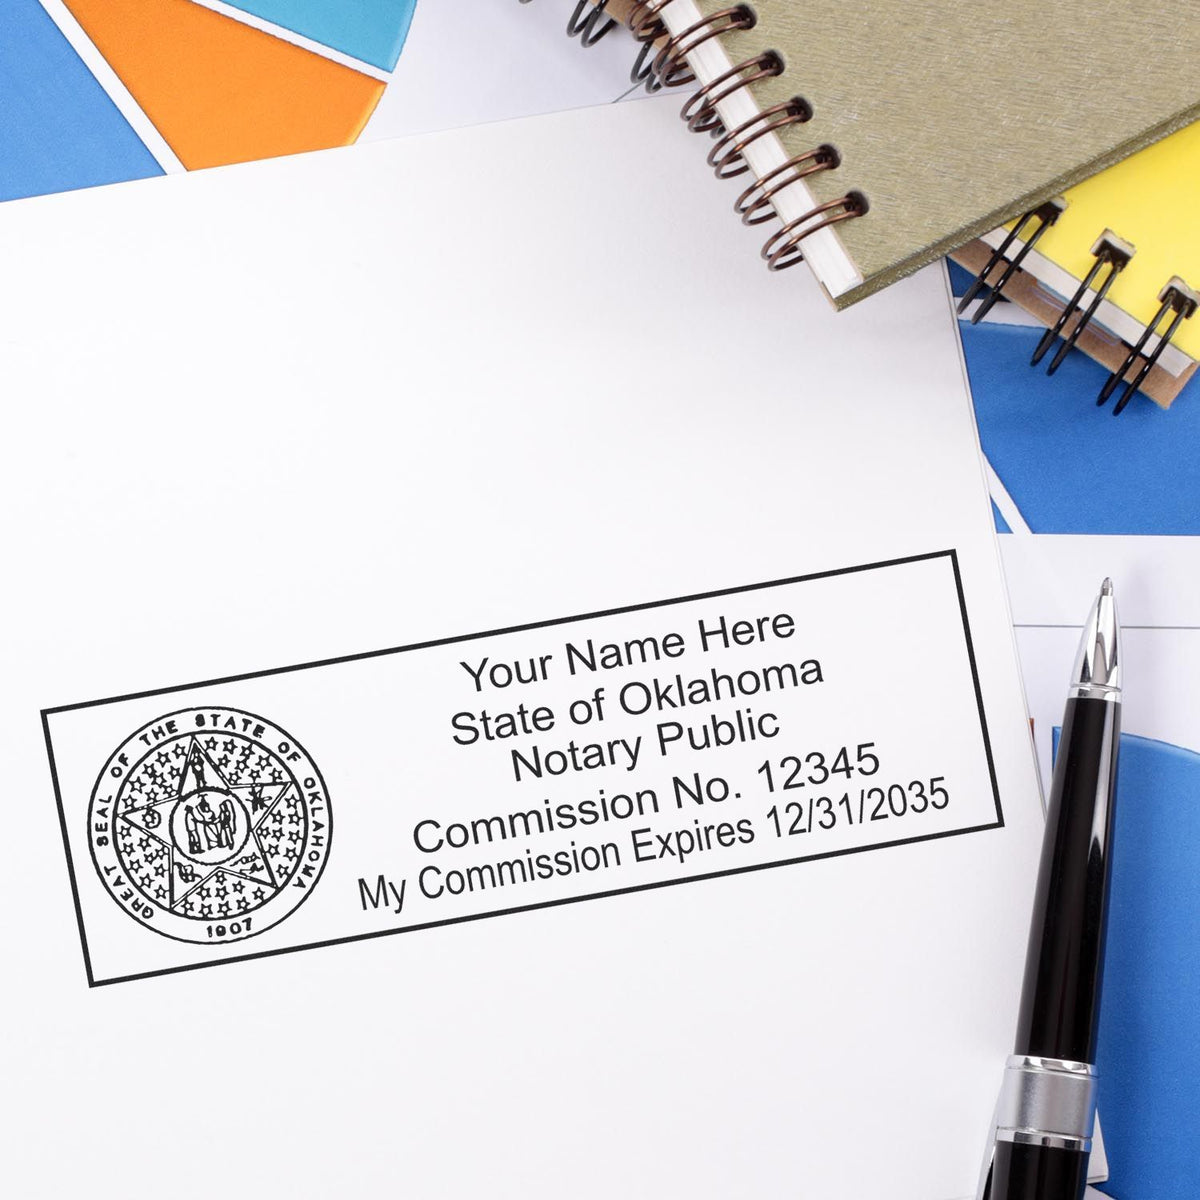 The Super Slim Oklahoma Notary Public Stamp stamp impression comes to life with a crisp, detailed photo on paper - showcasing true professional quality.